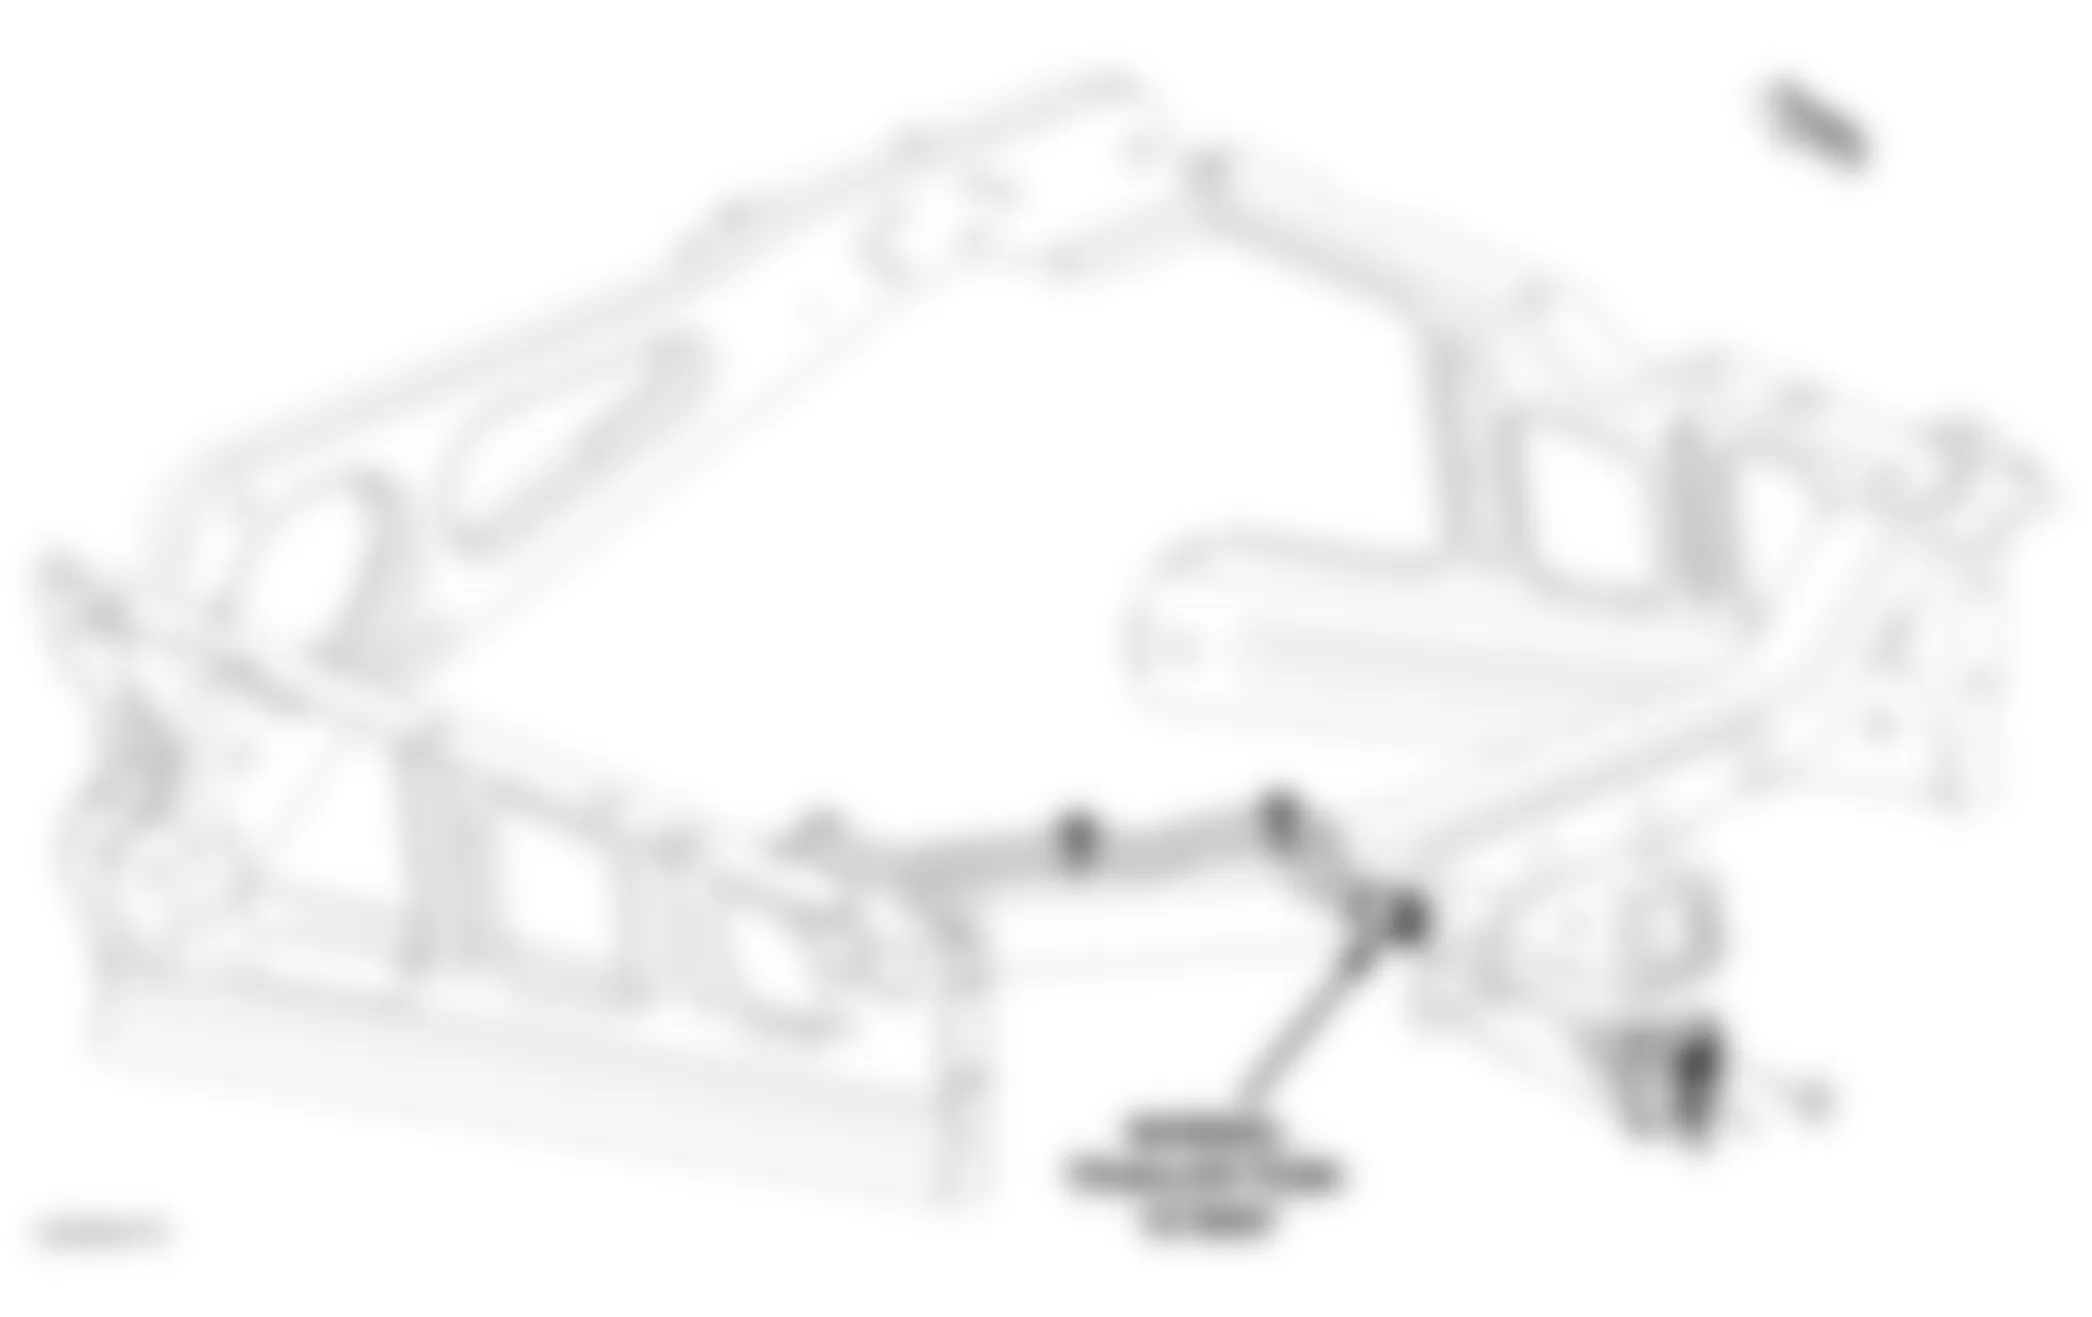 Jeep Grand Cherokee Laredo 2007 - Component Locations -  Rear Of Chassis